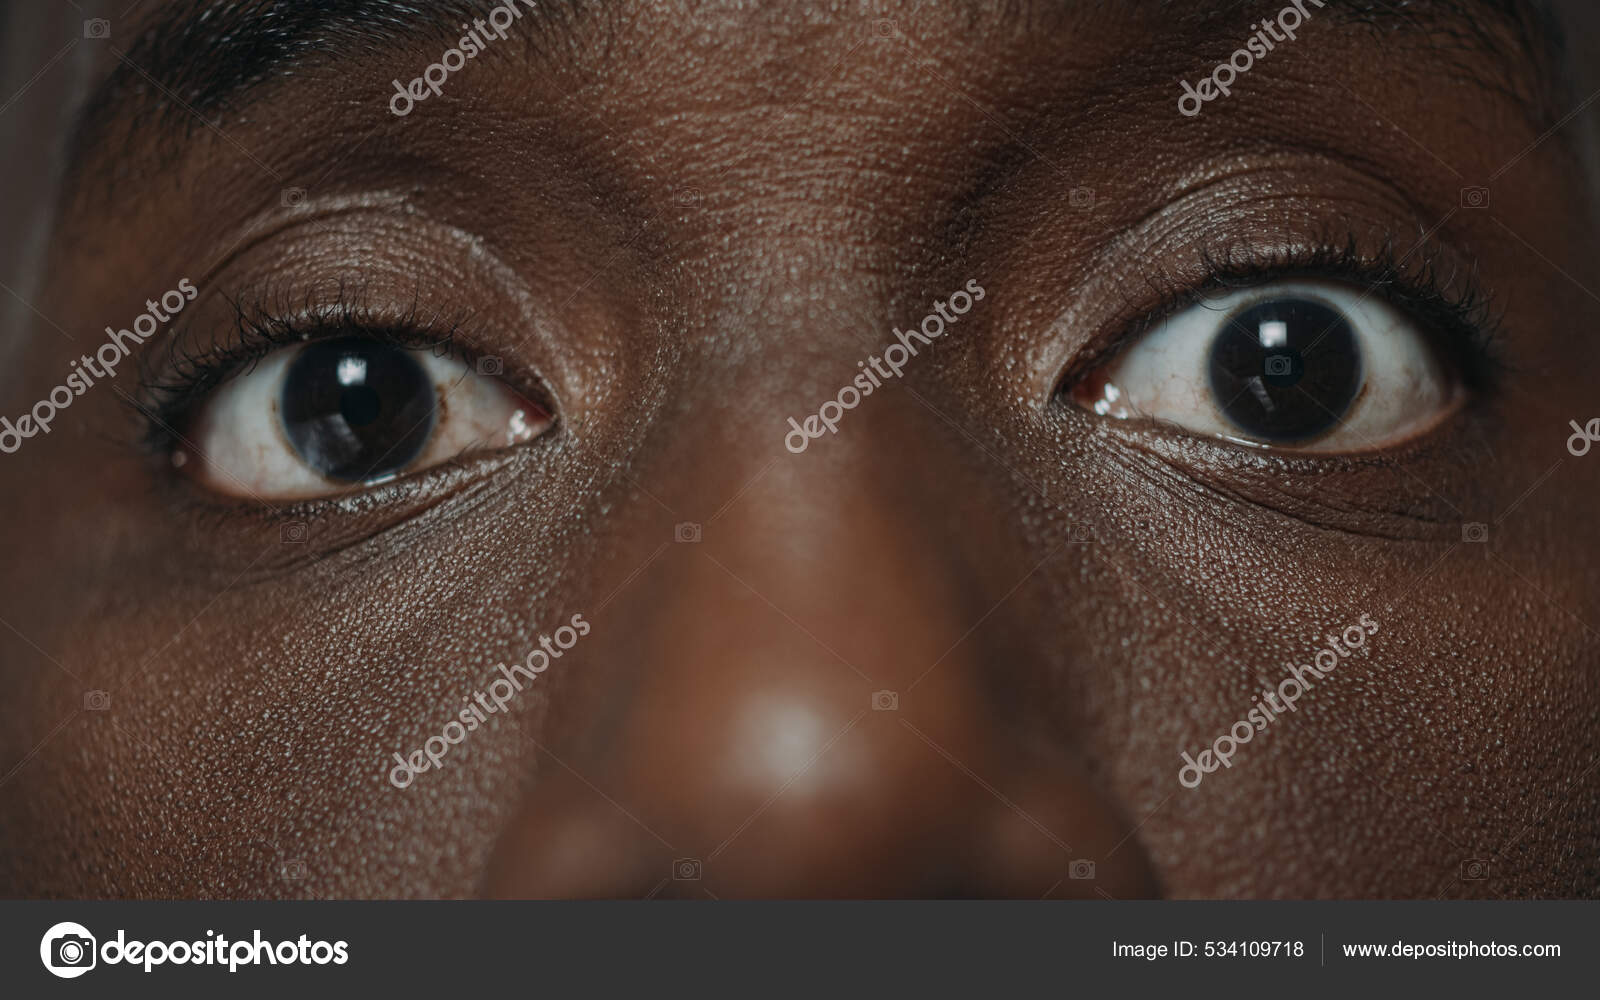 african american eyes close up